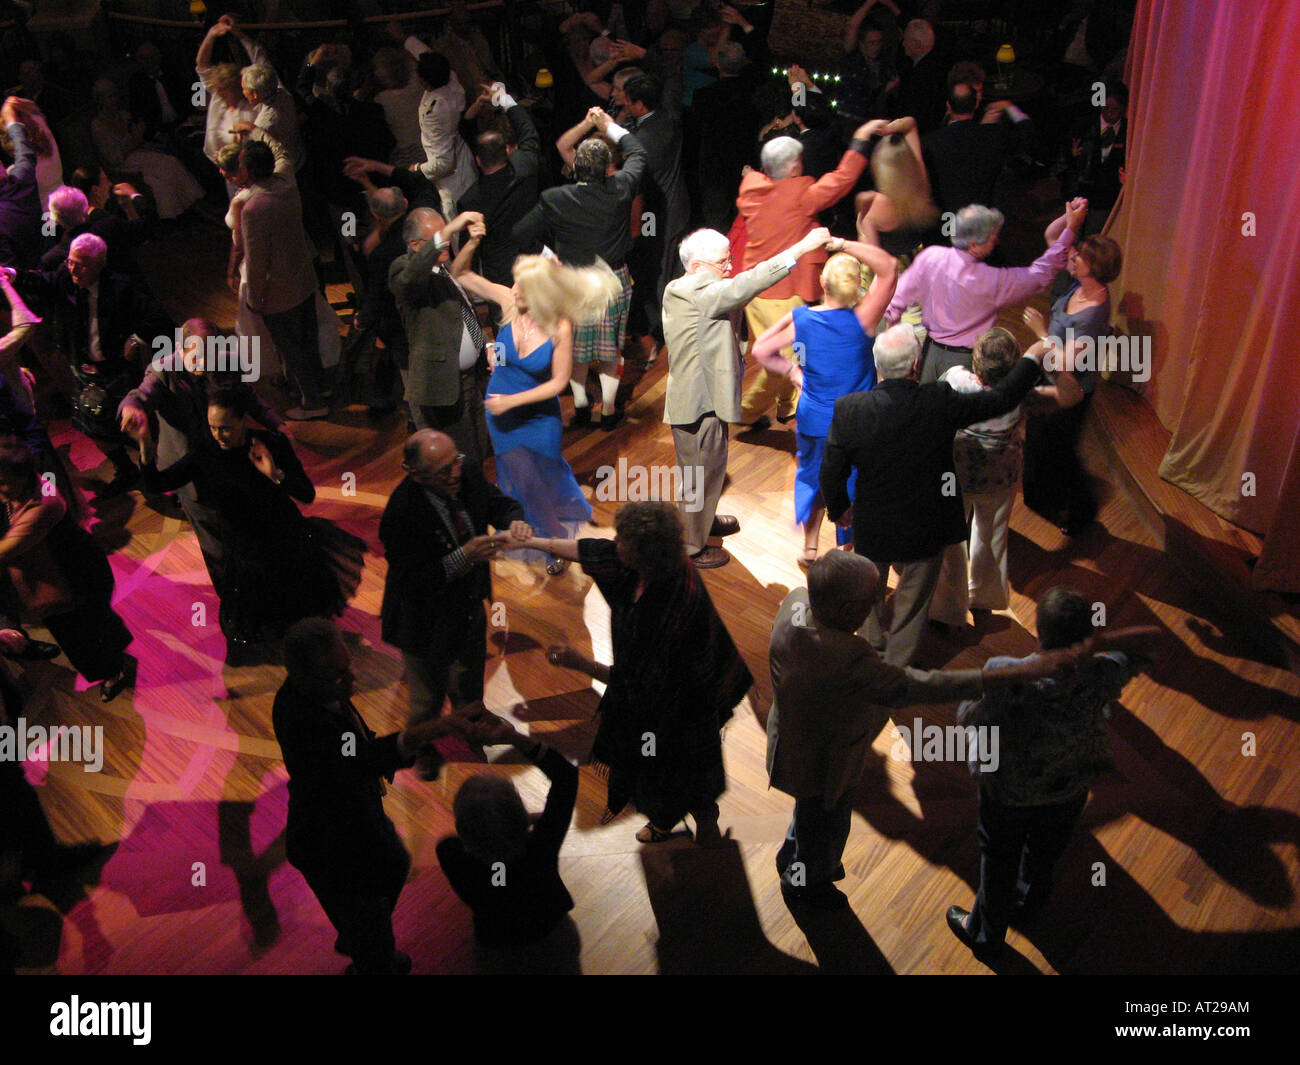 On Cunard's cruise ship, Queen Victoria, there's ballroom dancing almost every night in the Queens Room. Stock Photo